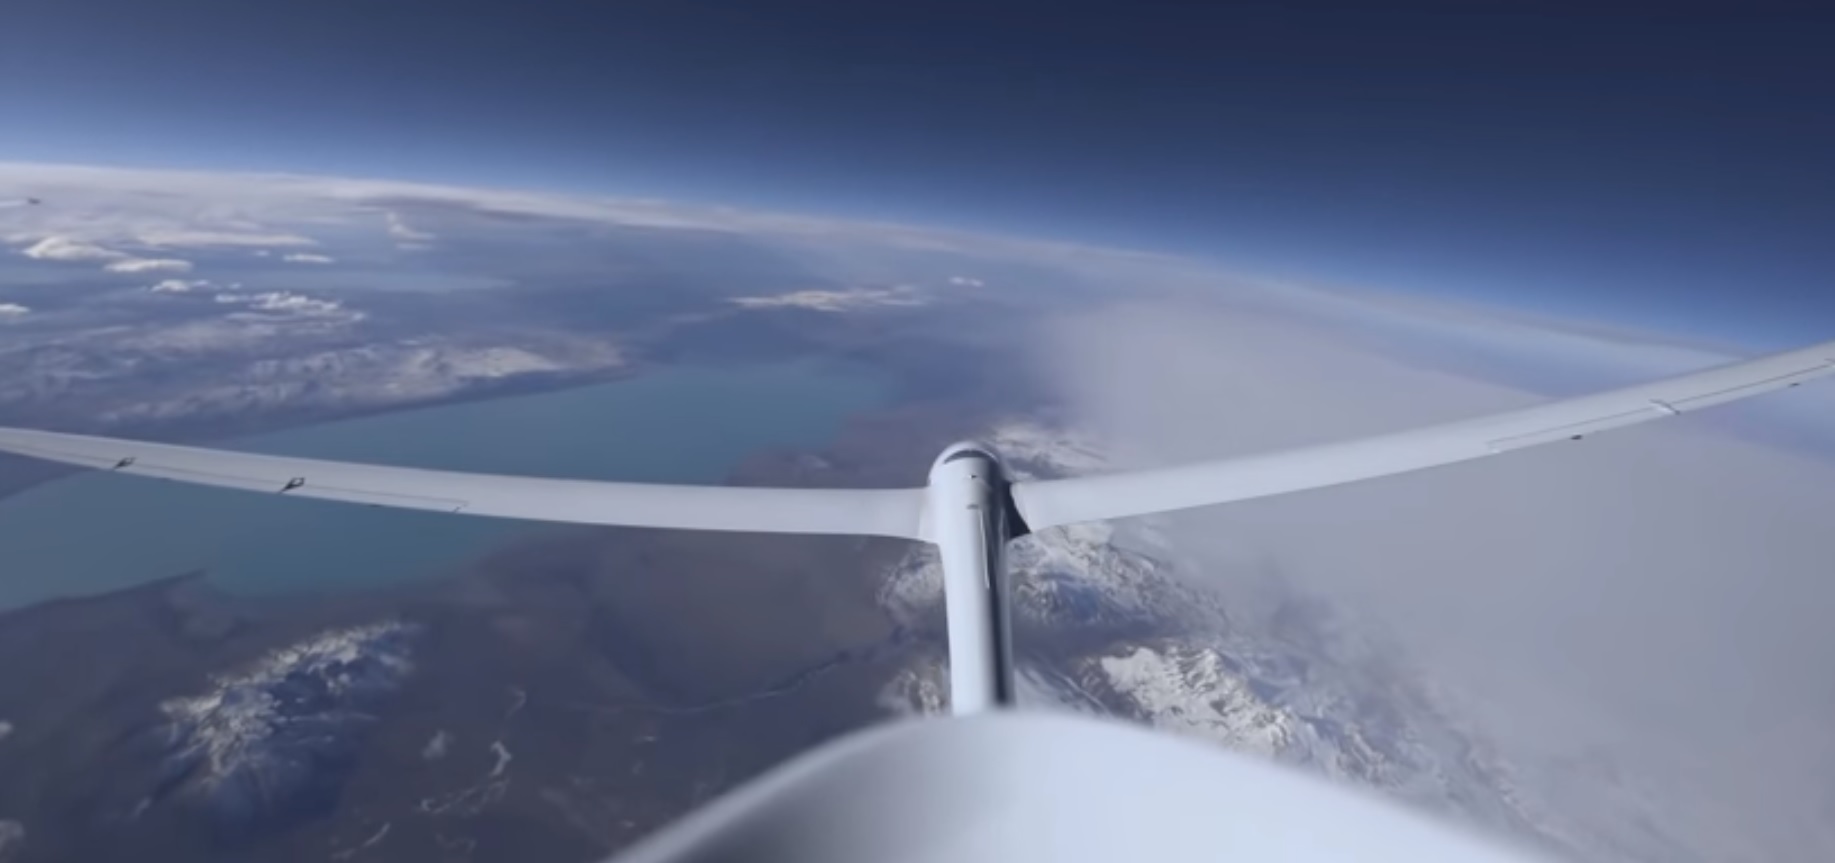 Stratospheric glider from Airbus set a flight altitude record